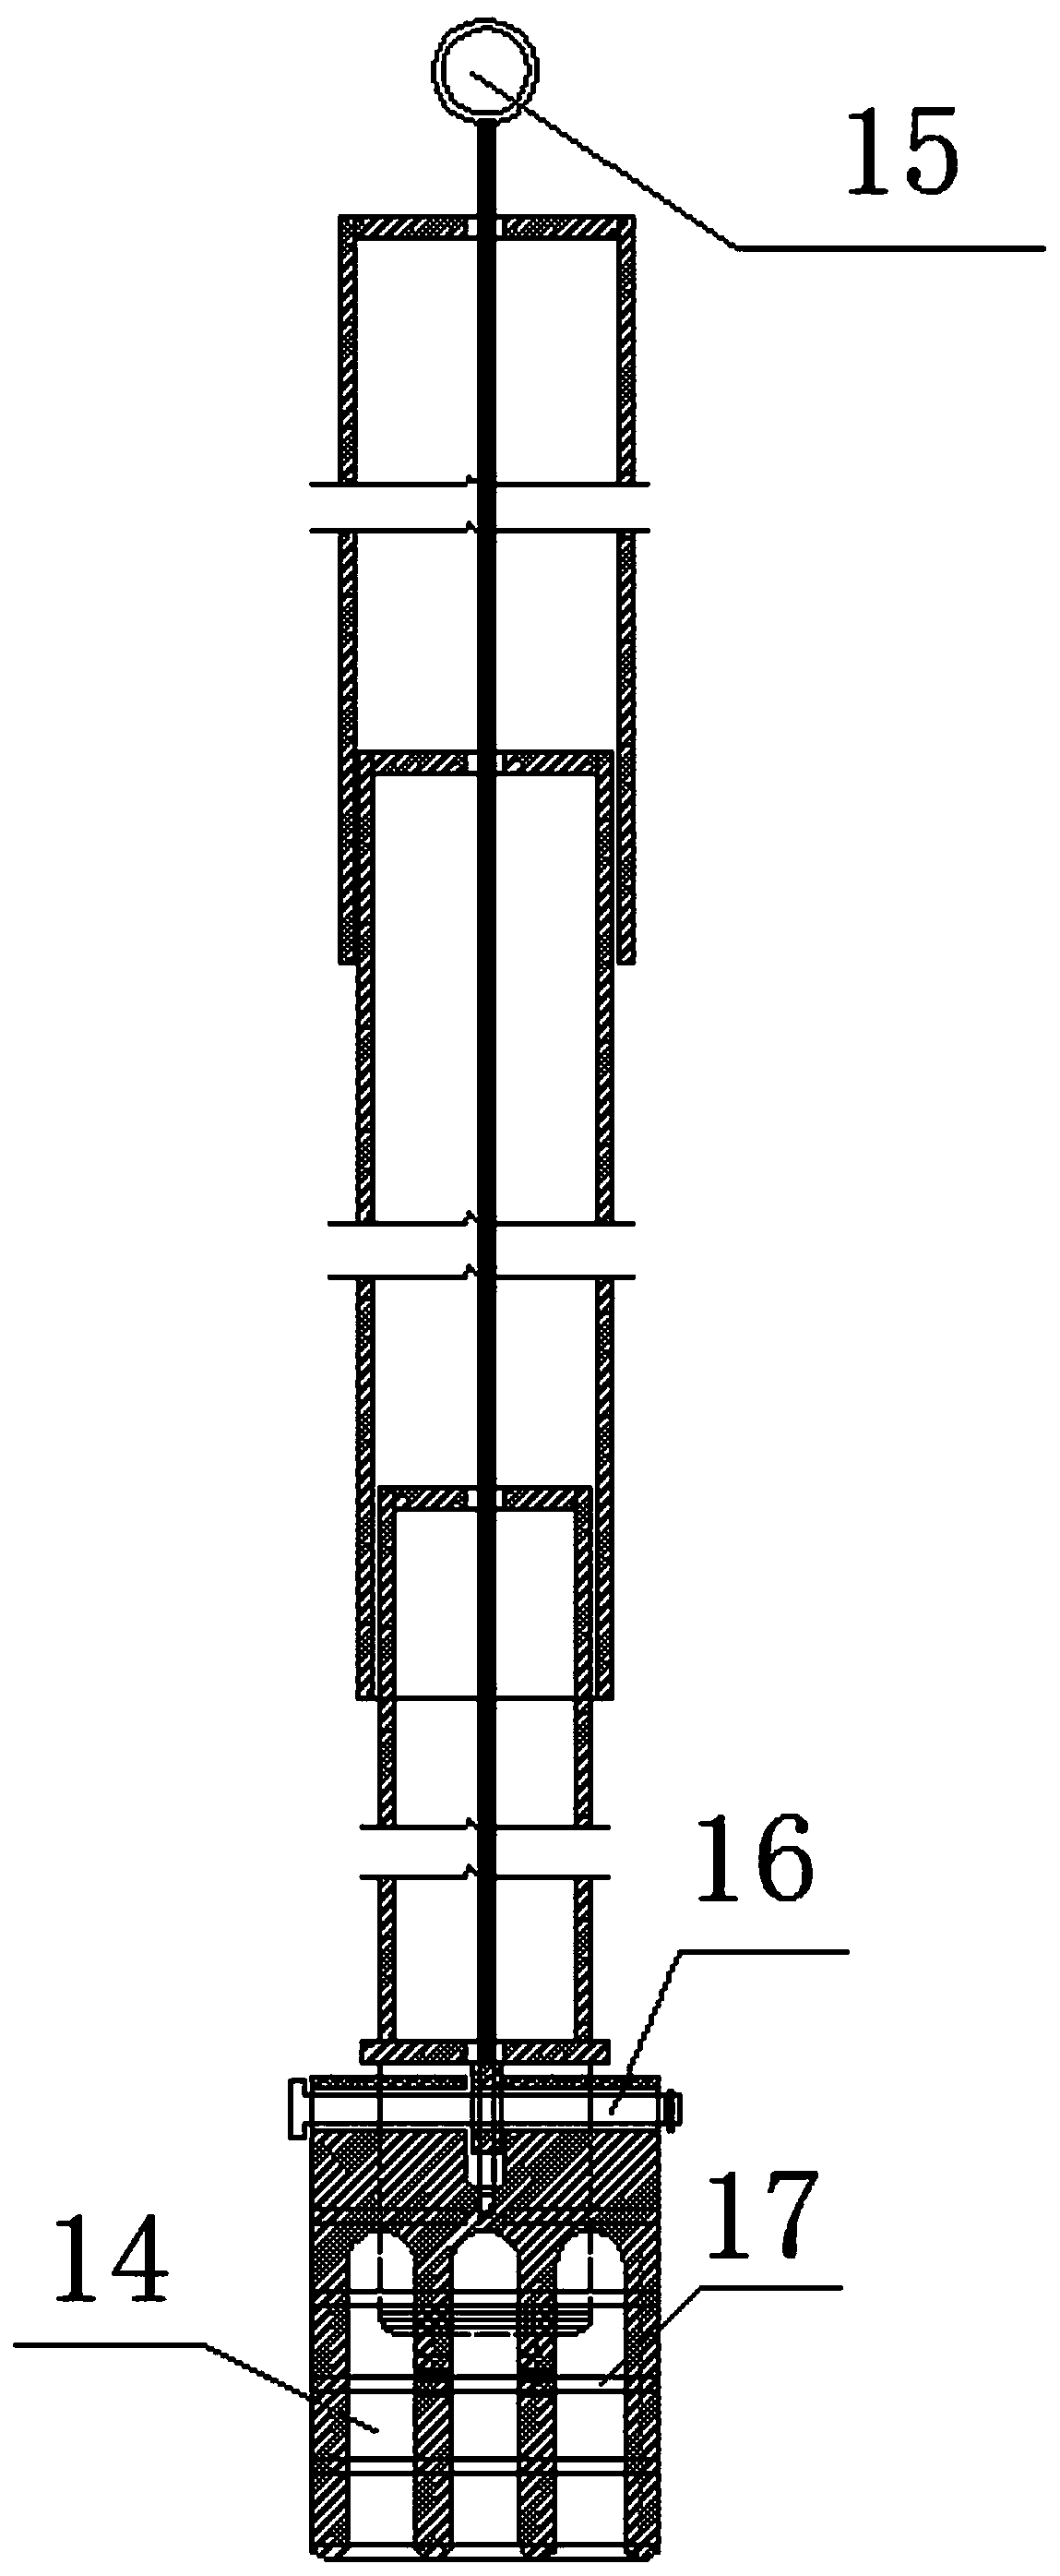 Underwater concrete pouring level measurement device and method